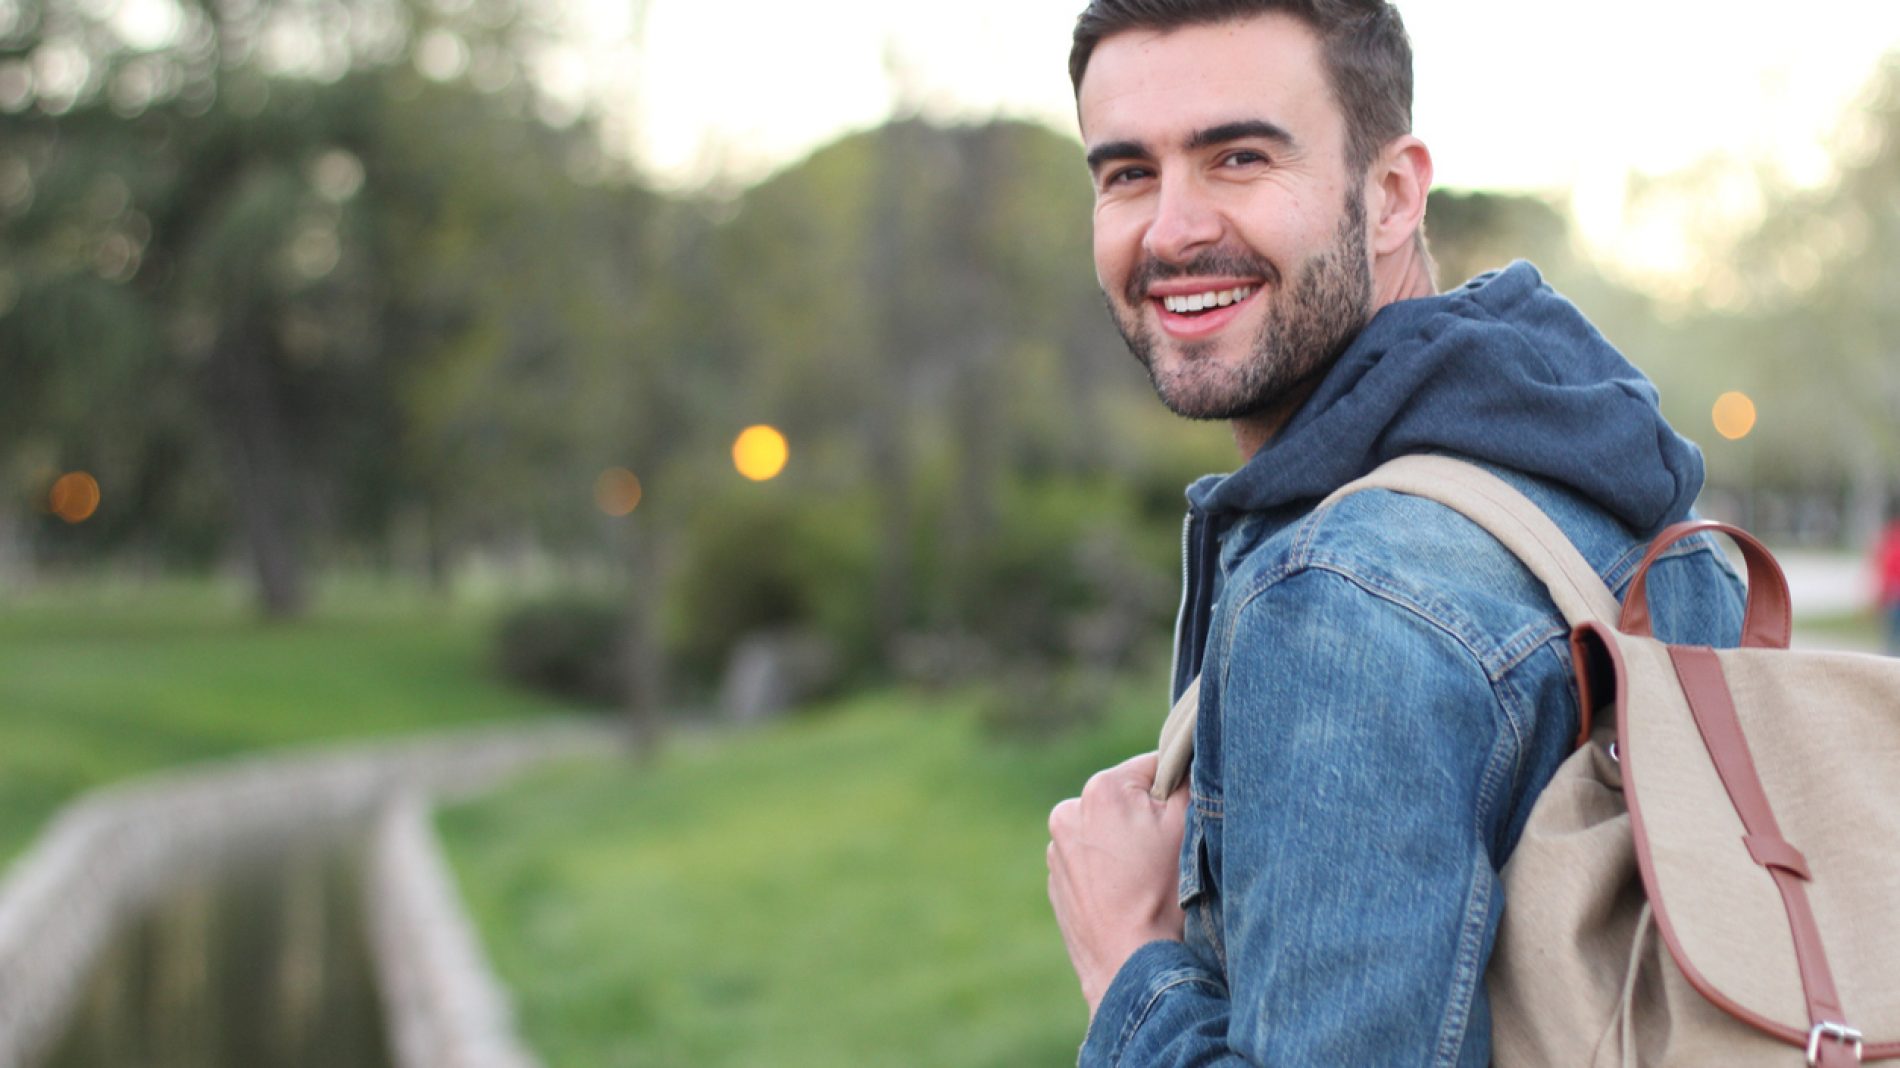 Smiley male holding backpack outdoors with copyspace